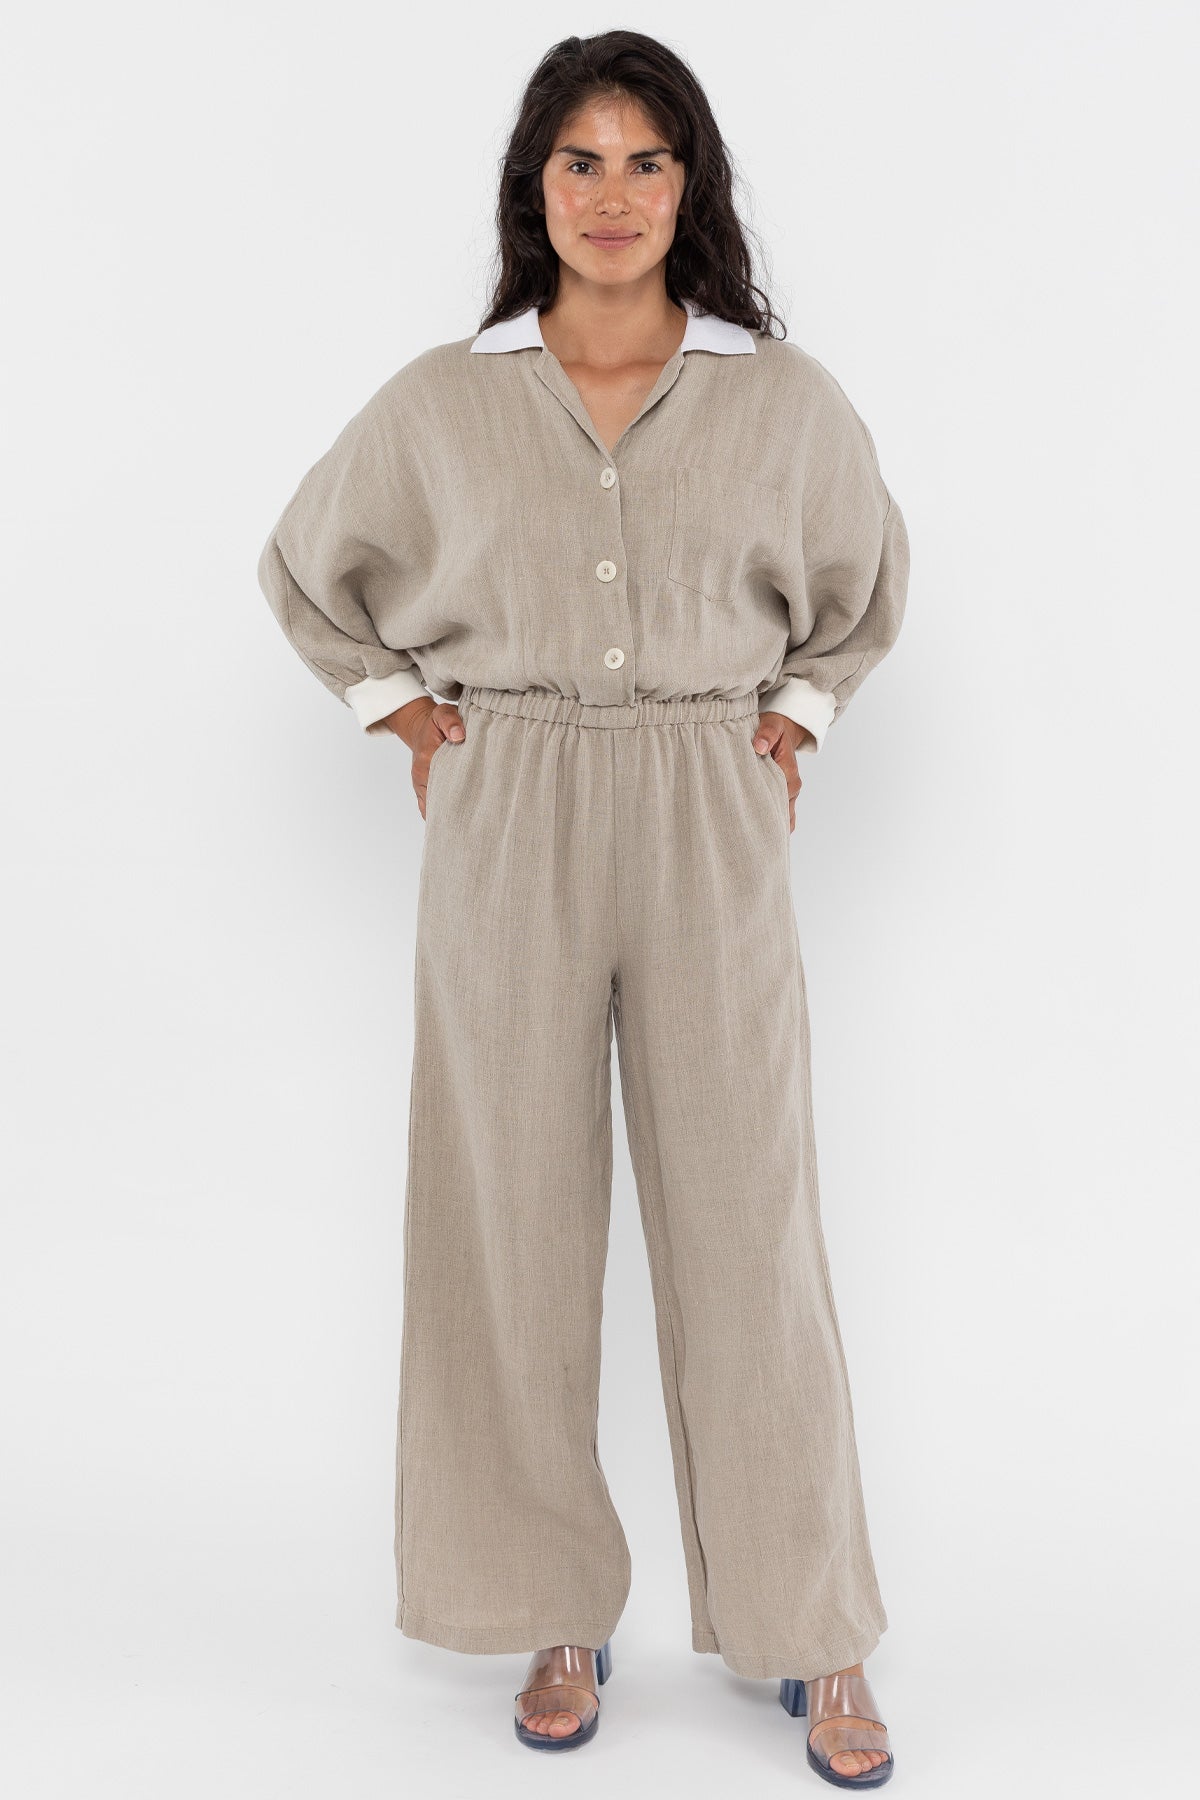 RLIN512GD - Linen Jumpsuit with Cotton Rib – Los Angeles Apparel